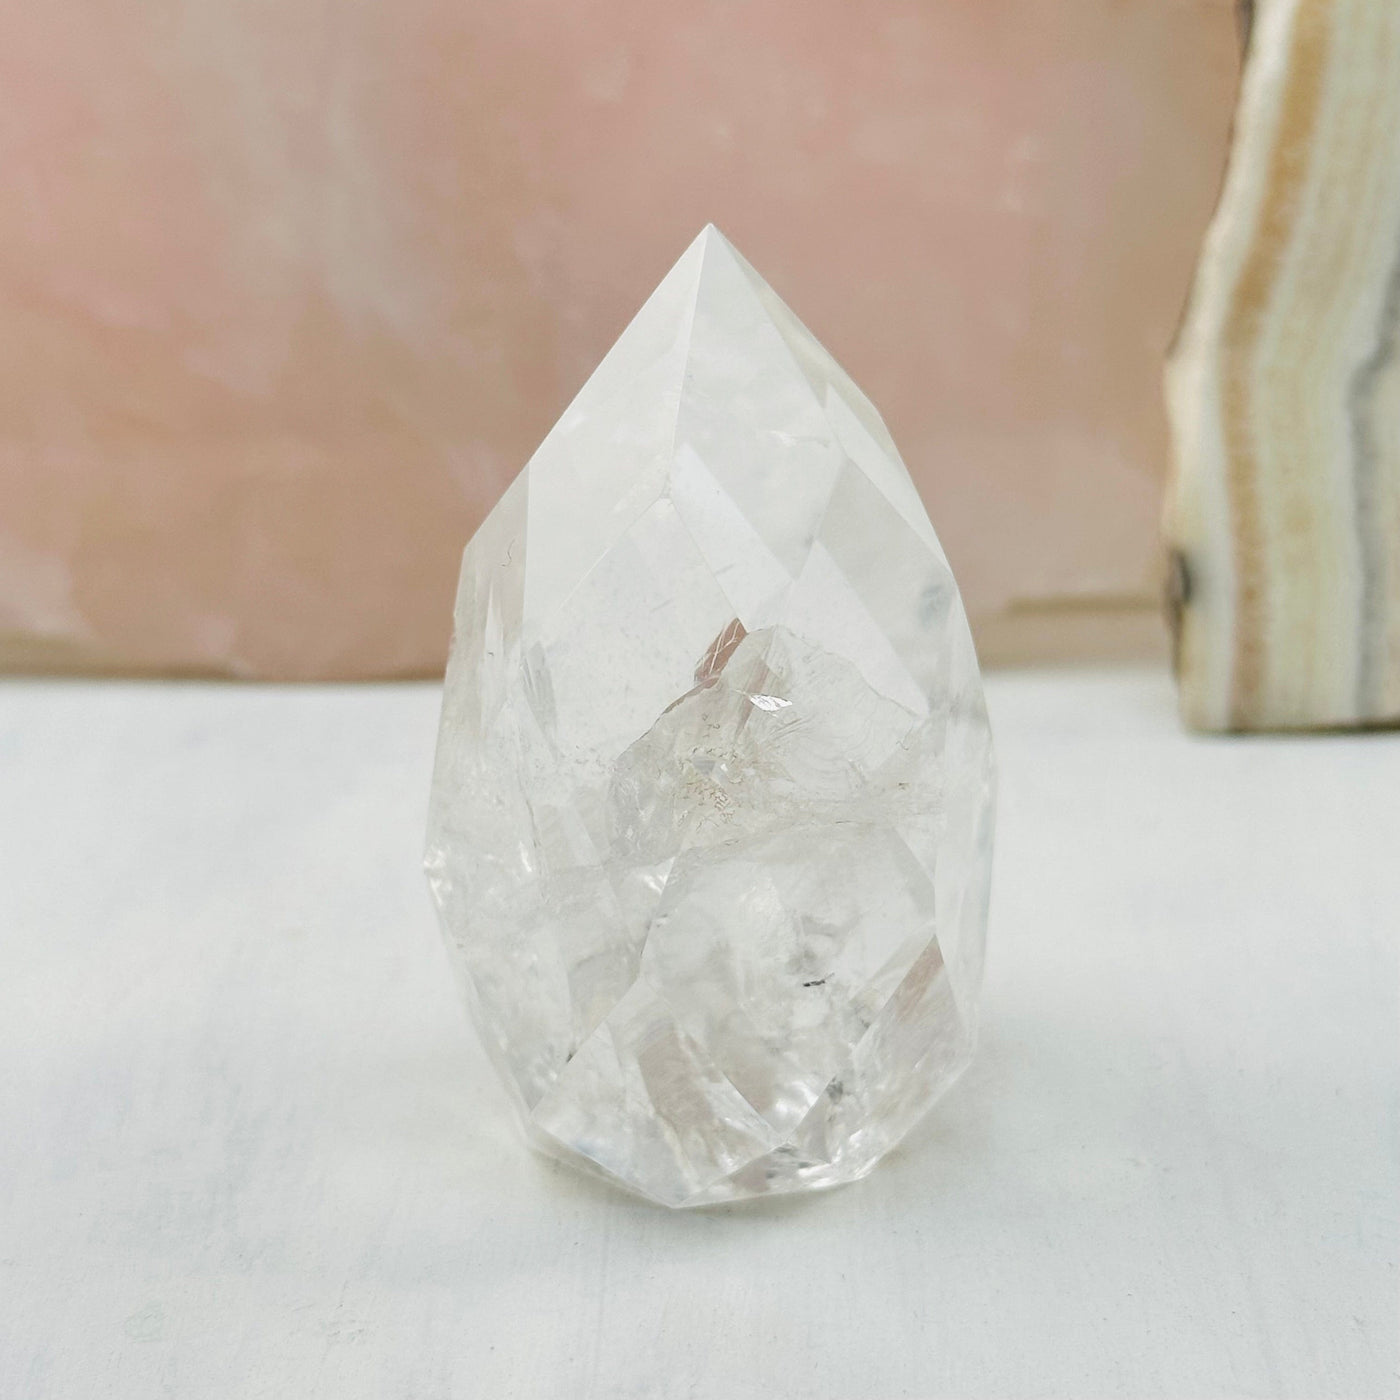 Faceted Clear Quartz Crystal Egg Point displayed as home decor 